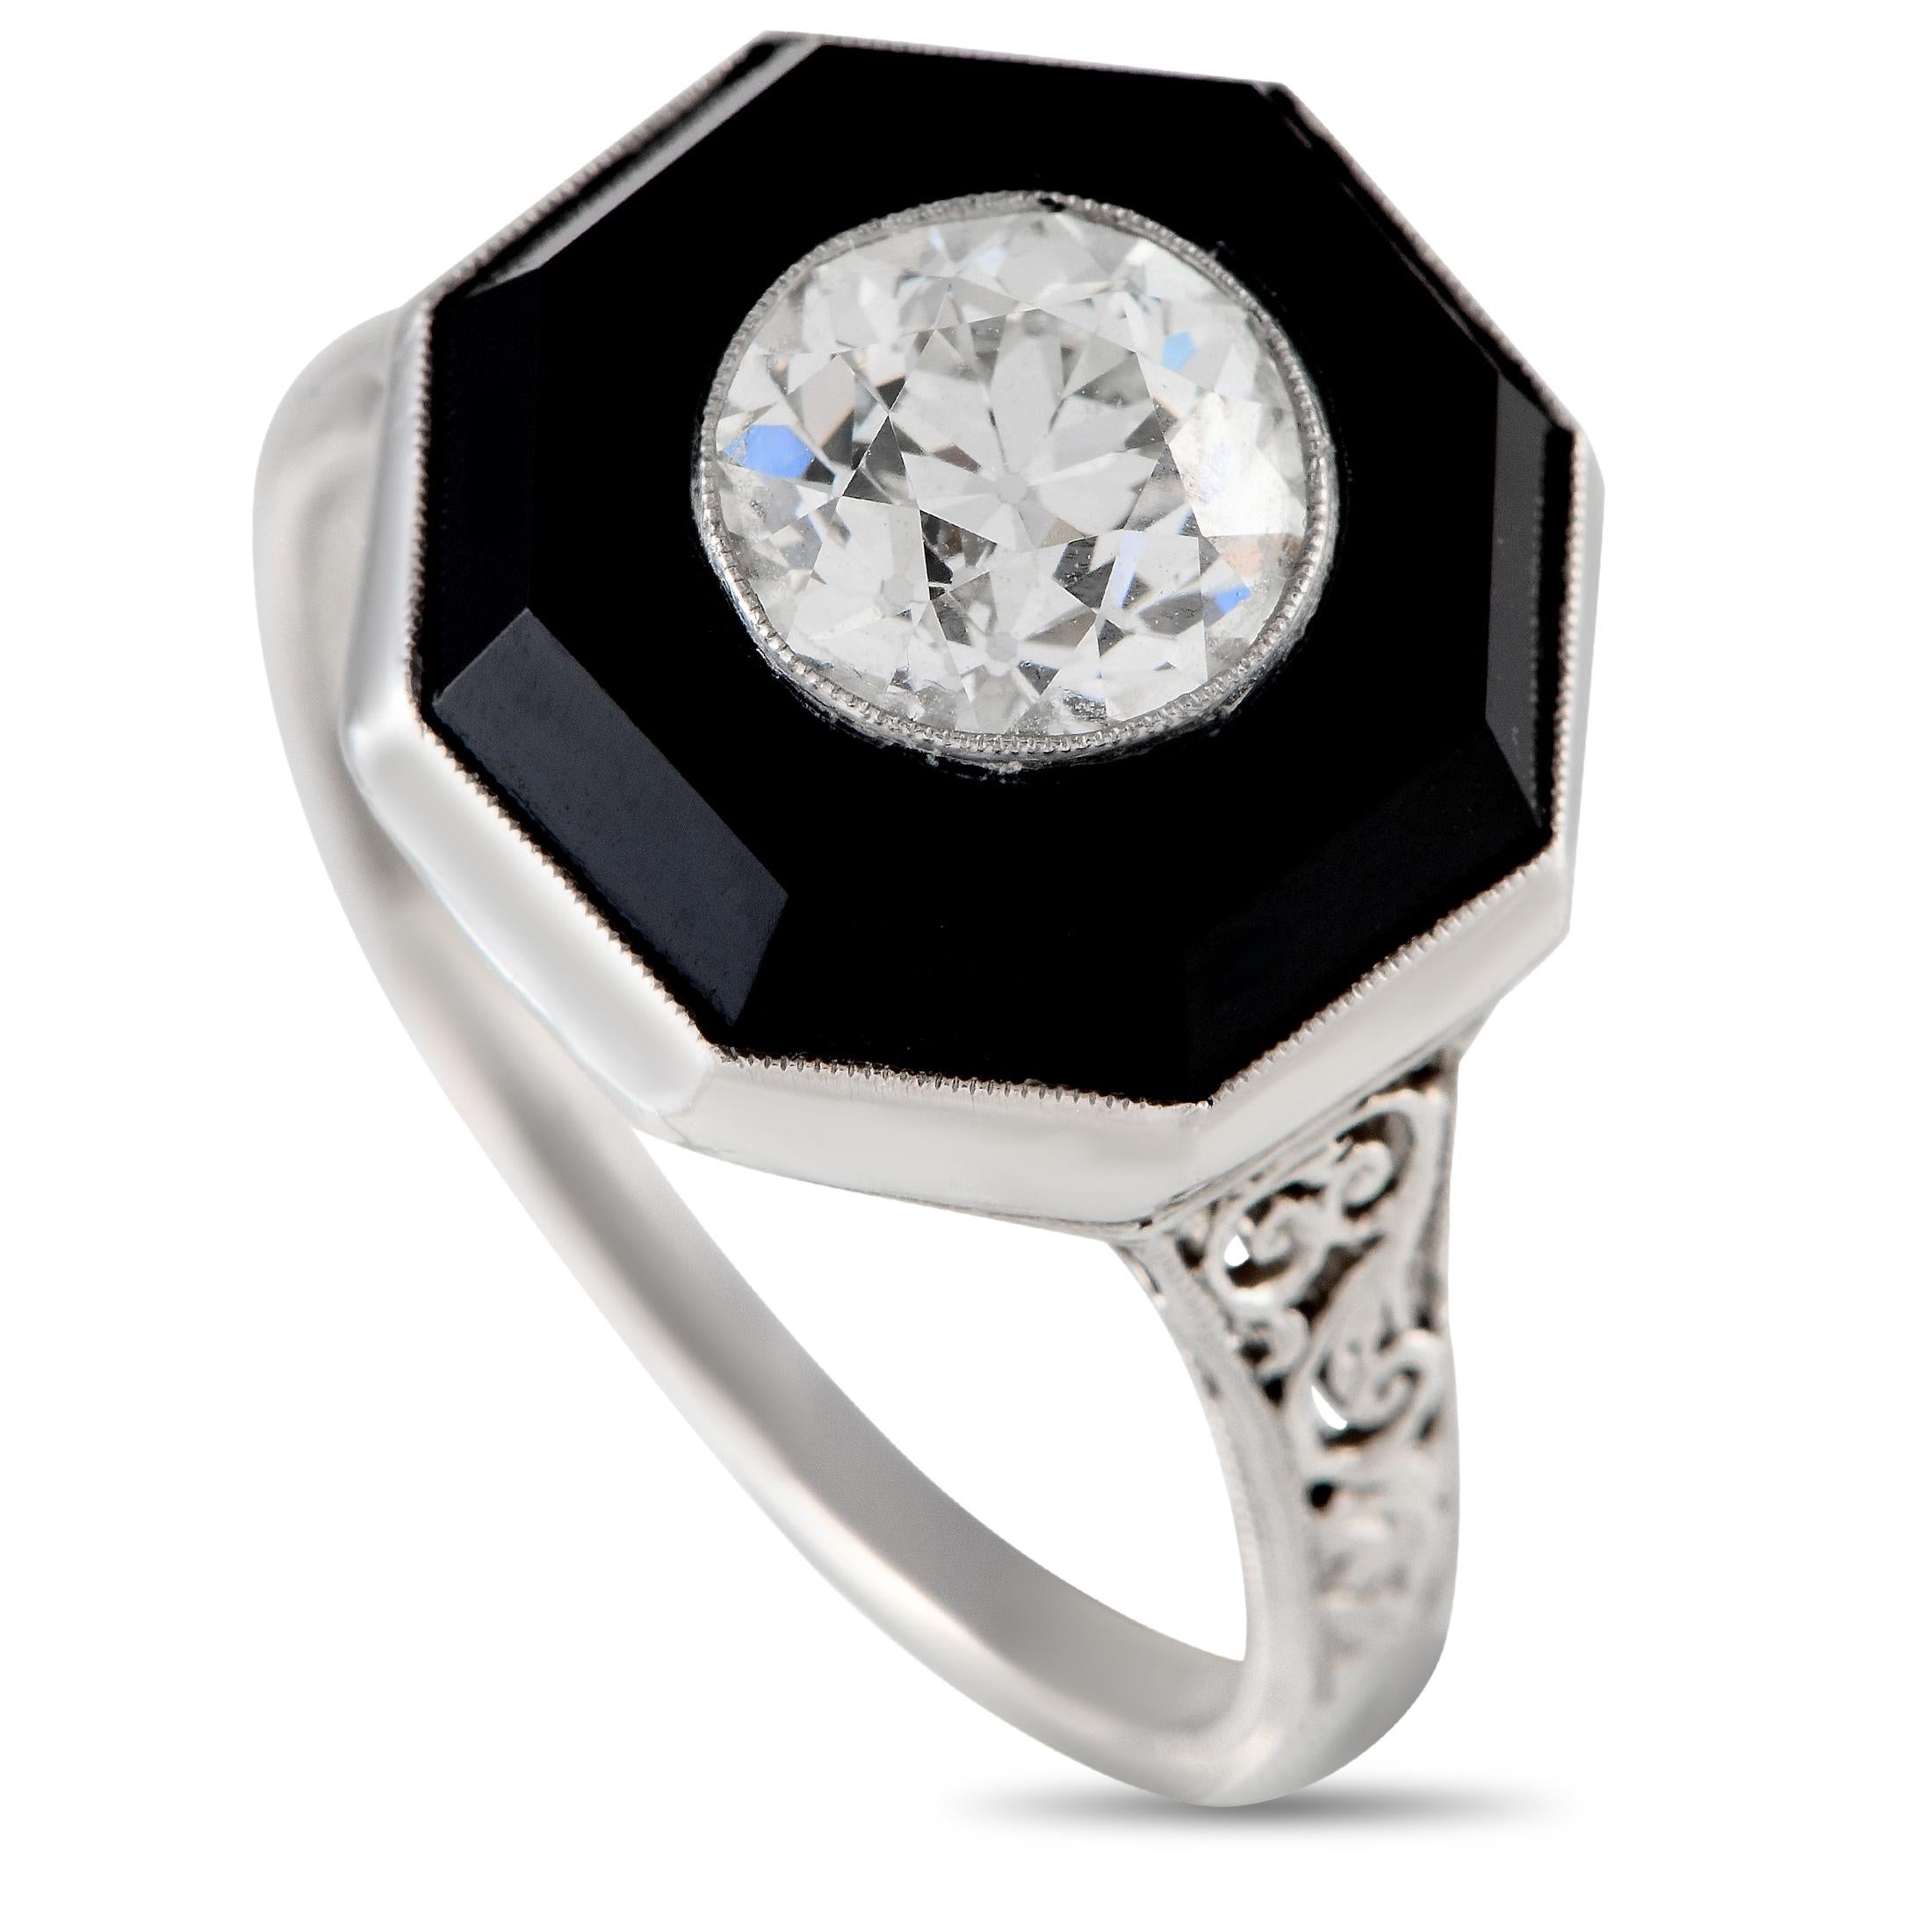 Antique Platinum 1.51ct Diamond and Onyx Ring In Excellent Condition For Sale In Southampton, PA